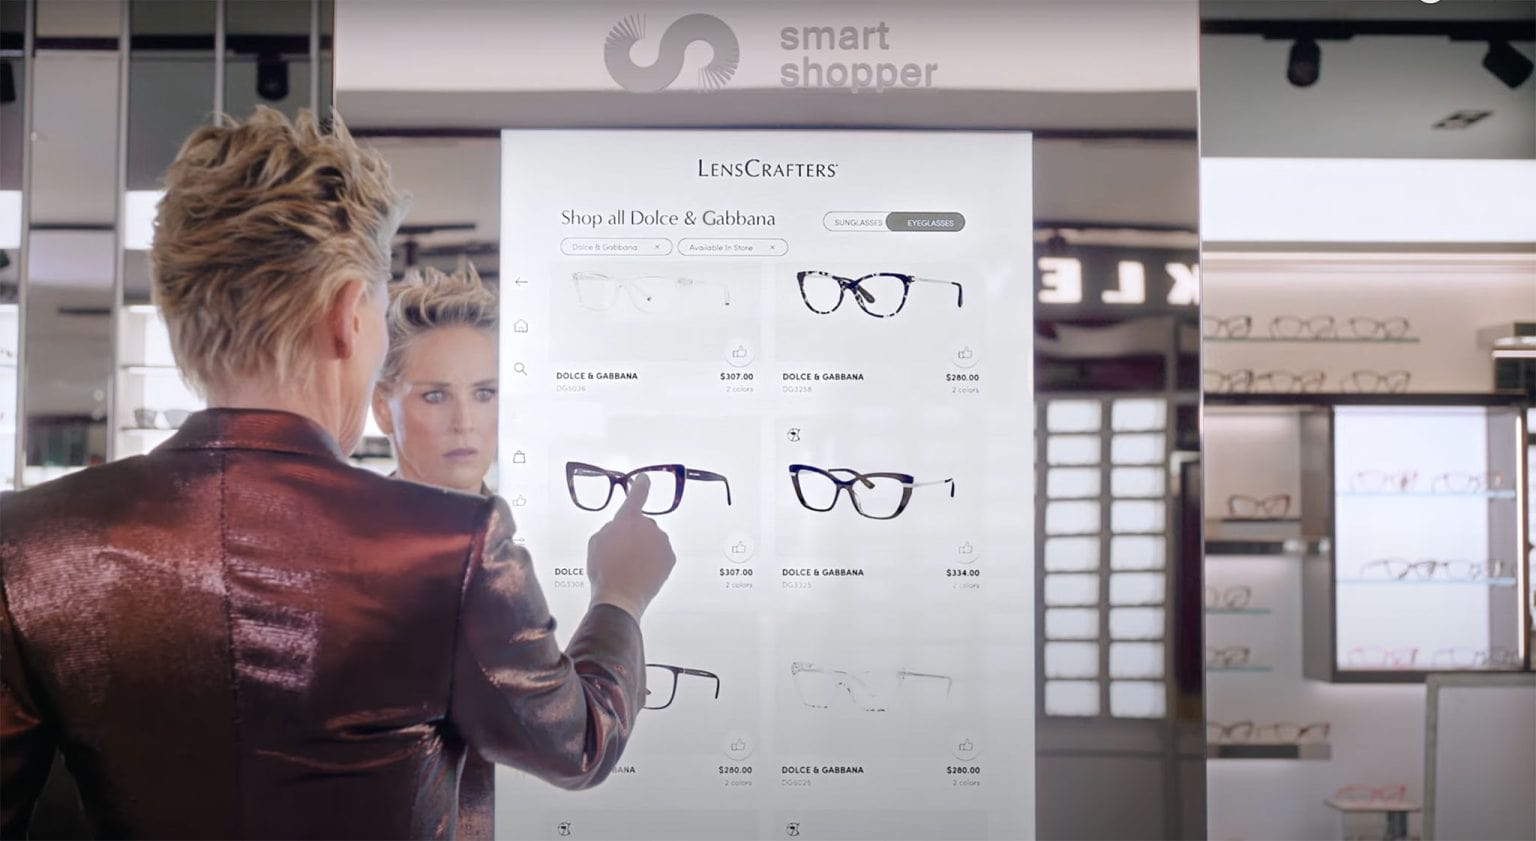 LensCrafters Commercial Actress Sharon Stone Rocks Glasses